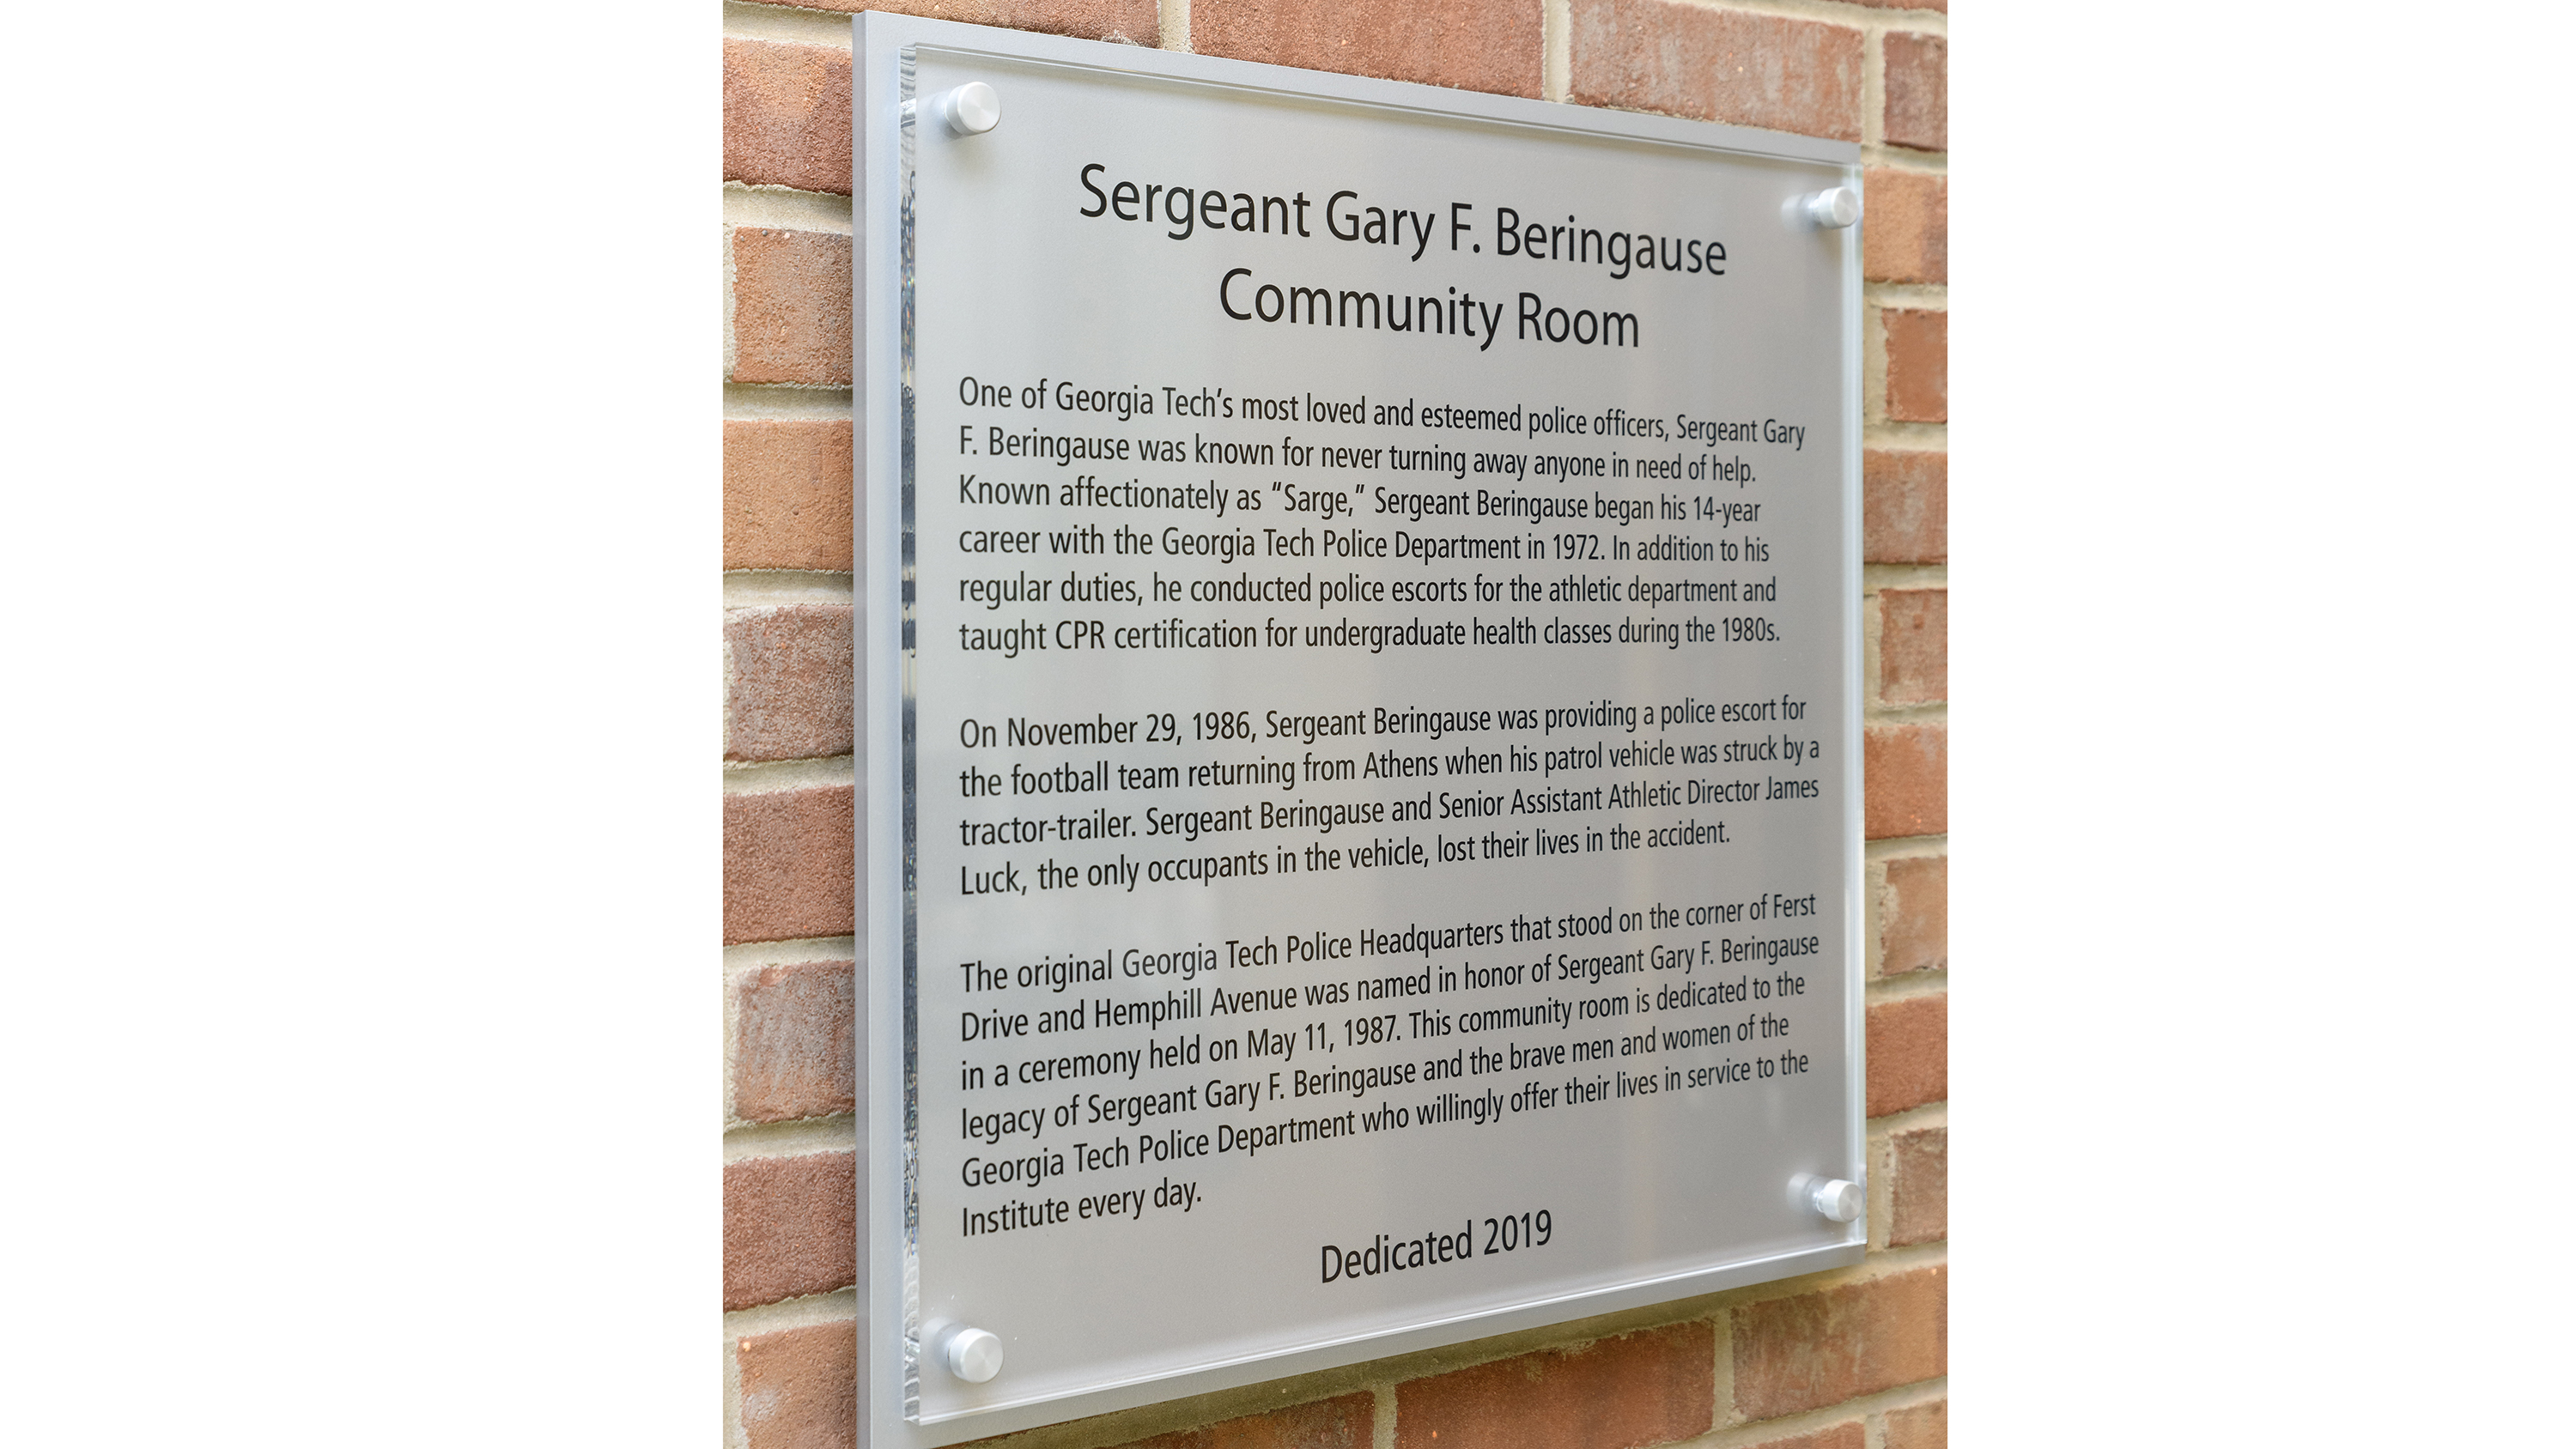 The Georgia Tech Police Department named its community room for the late Sgt. Gary Beringause who was killed in the line of duty in 1986.